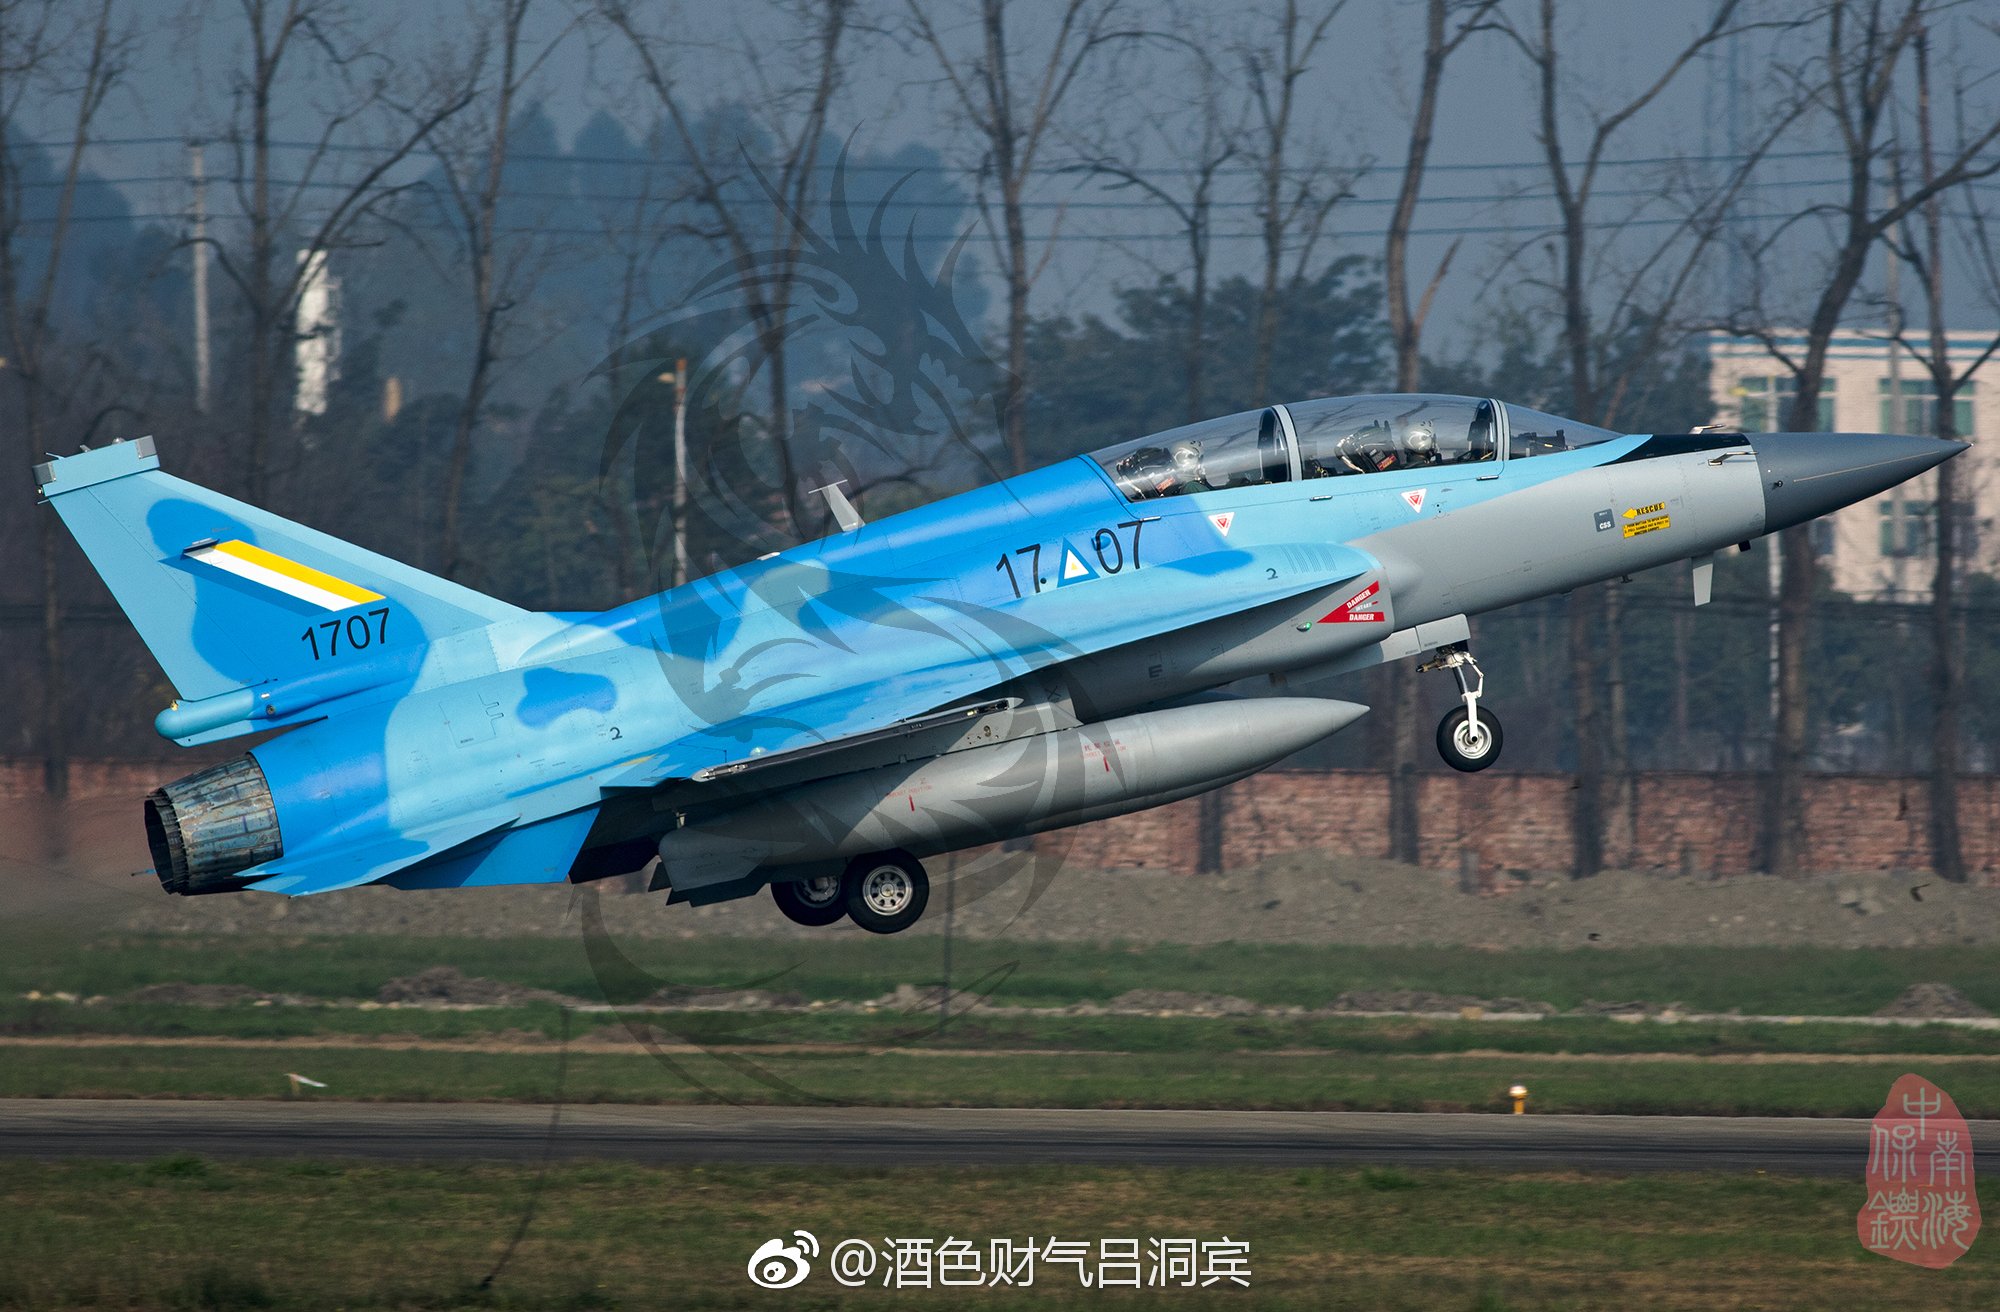 myanmar-air-force-receives-first-two-jf-17b-thunder-fighter-trainer-aircraft.jpg